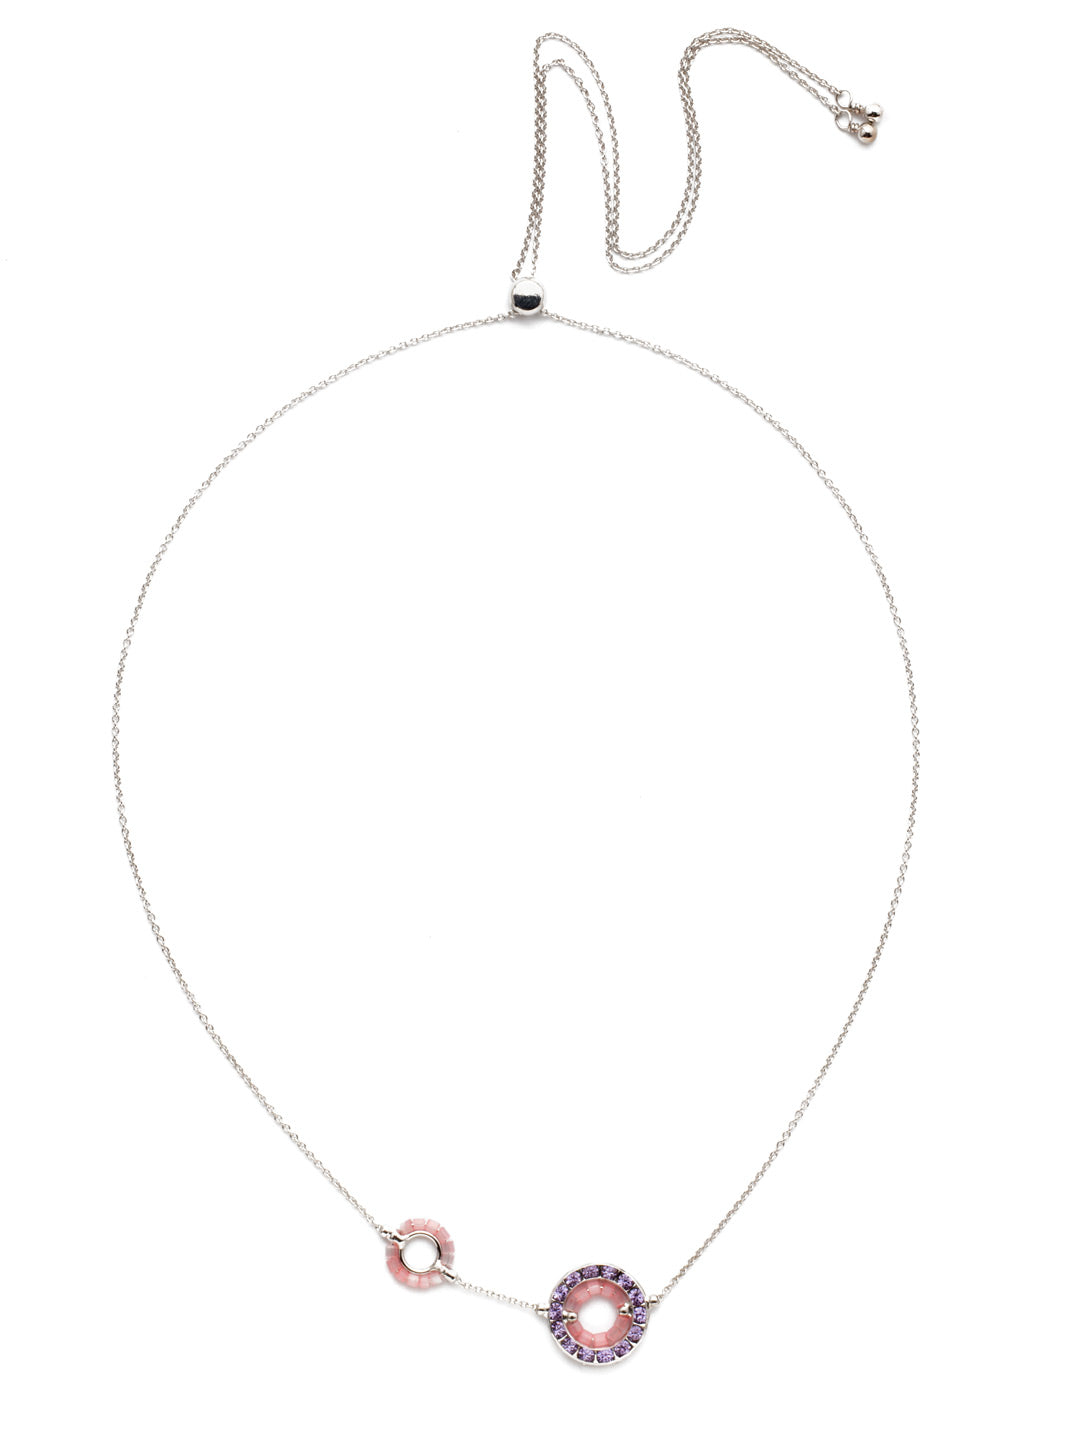 Fire & Ice Pendant Necklace - NEH4RHTUL - Red handcrafted beadwork is joined with a ring of crystal accents on an adjustable slider chain. From Sorrelli's Tulip collection in our Palladium Silver-tone finish.